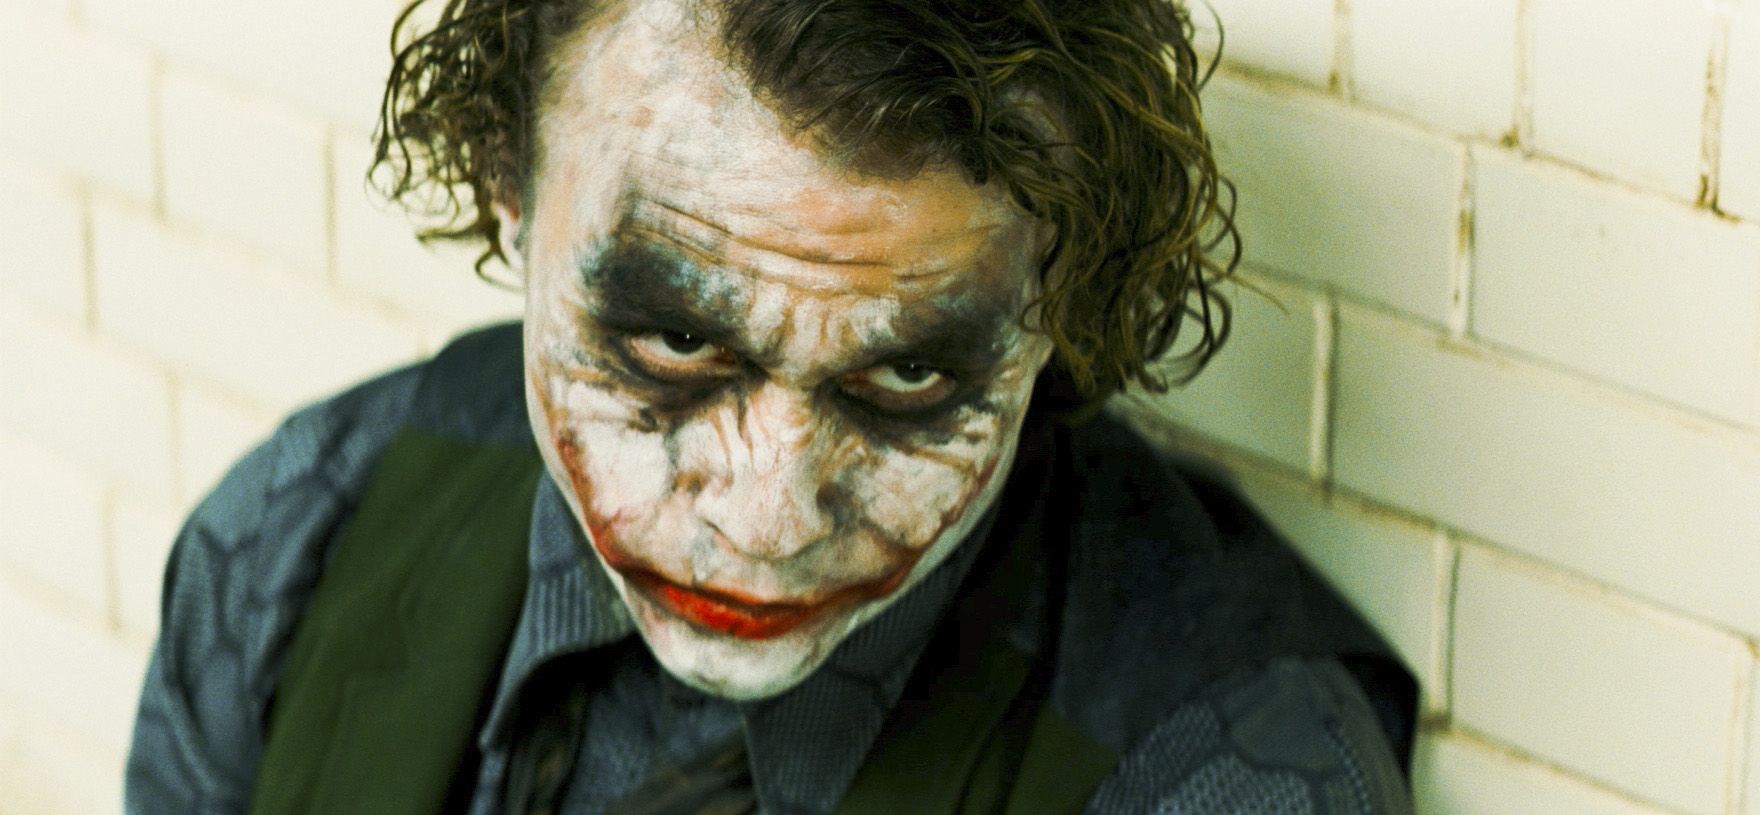 First time Michael Caine saw Heath Ledger as The Joker in Th